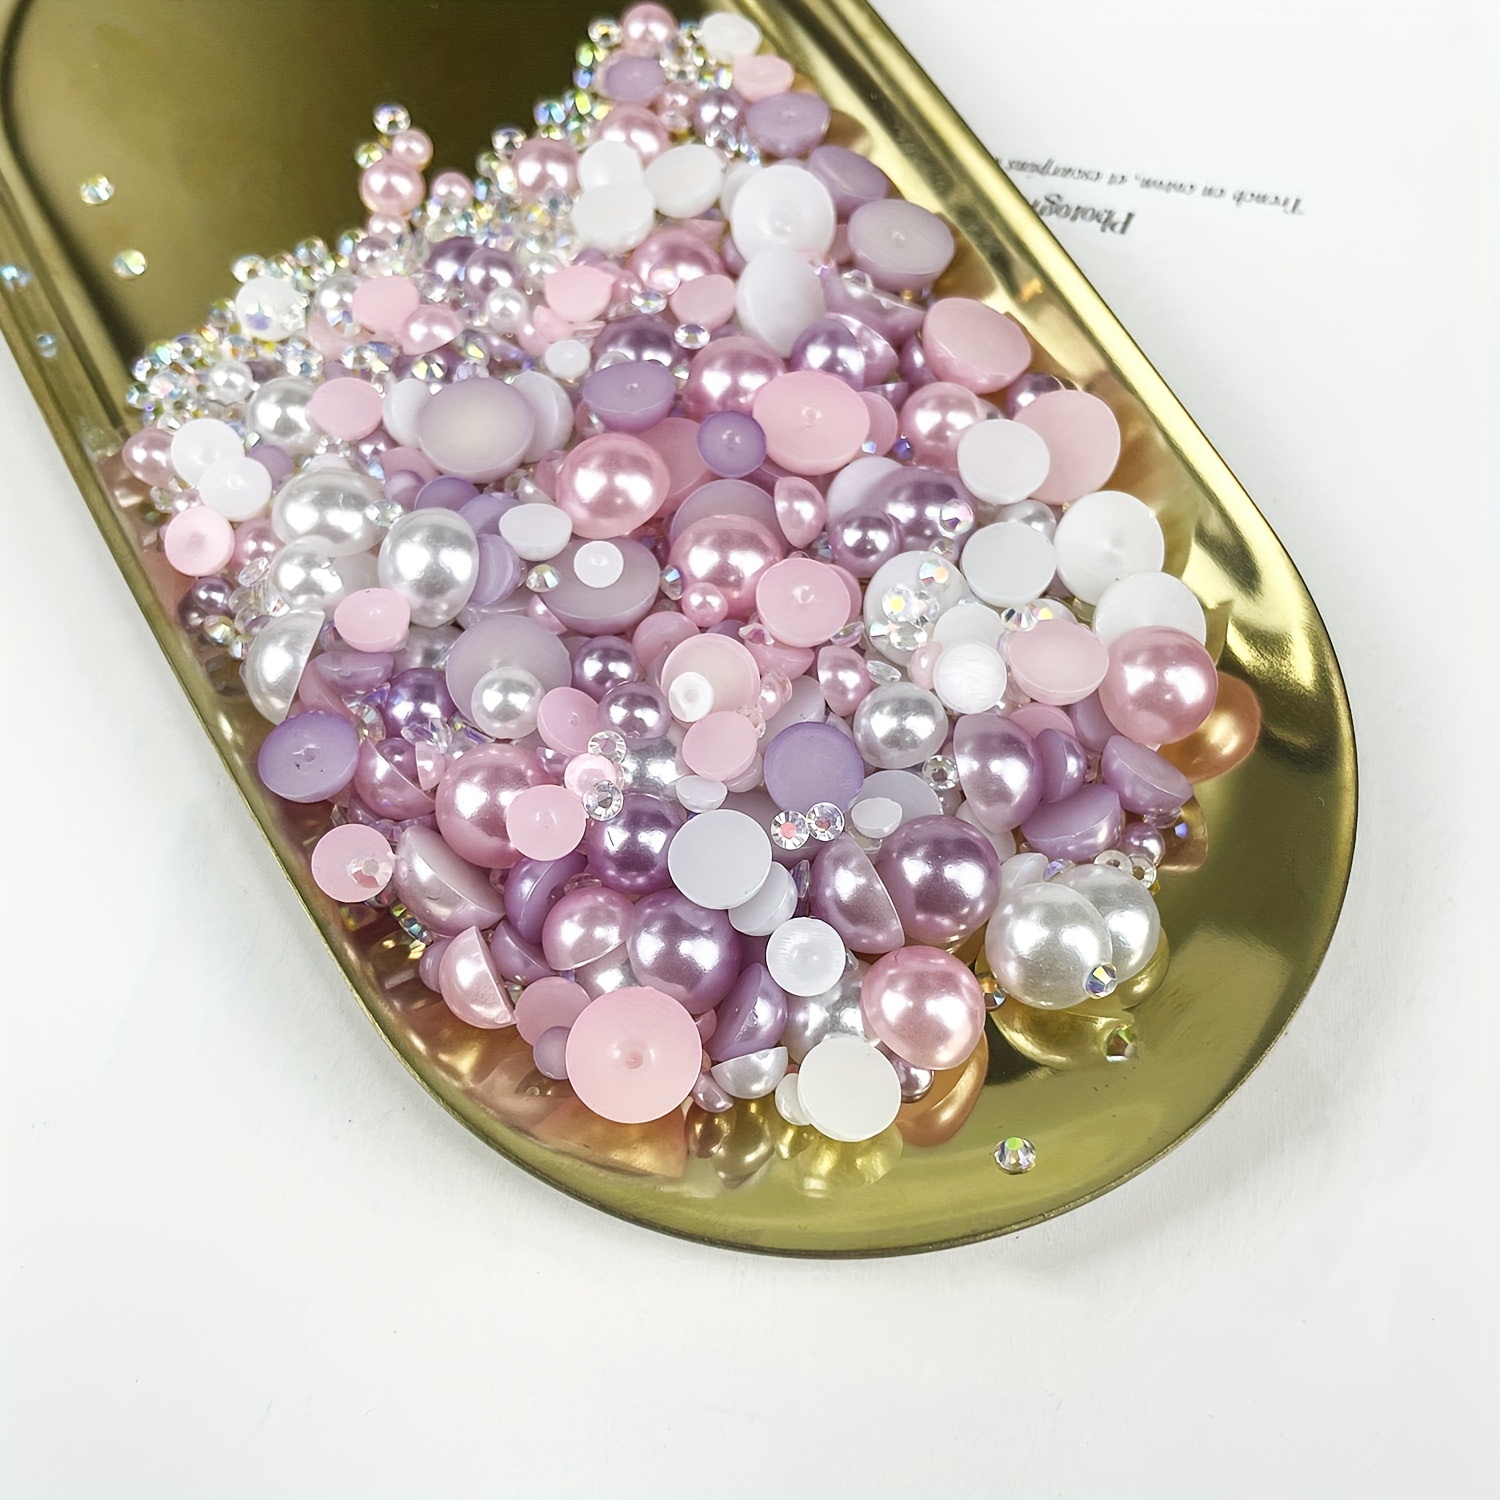 Salty Sunset Pearl Mix, Flatback Pearls and Rhinestone Mix, Sizes Range  3MM-6MM, Flatback Jelly Resin, Faux Pearls Mix, Mixed Sizes